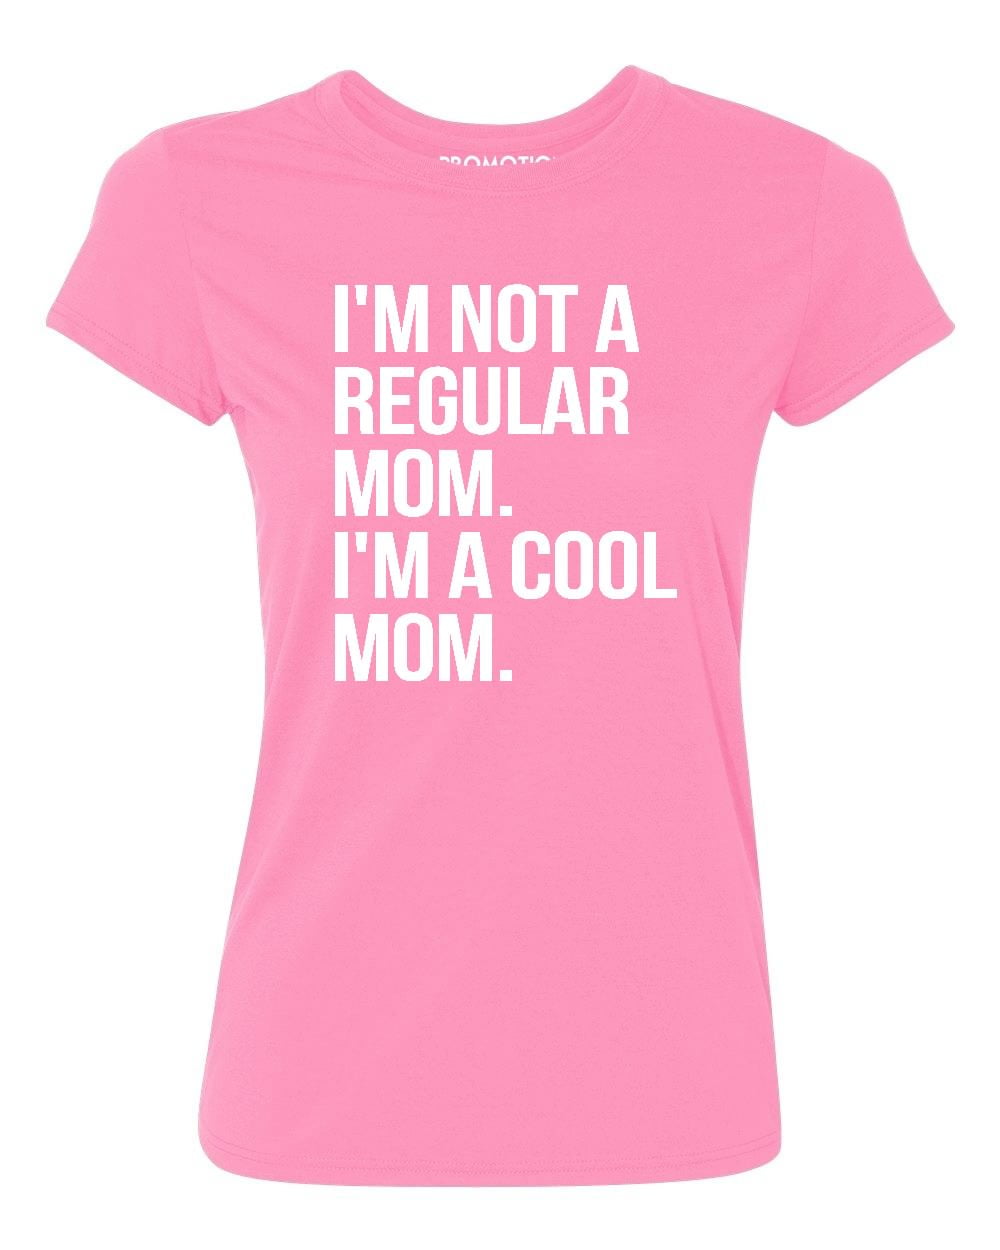 Cool Aunt shirt Gift for Best Friend Gift for Sister I'm a Cool Mom Shirt I'm Not Like a Regular Mom Mom shirt Fun Cozy Shirt